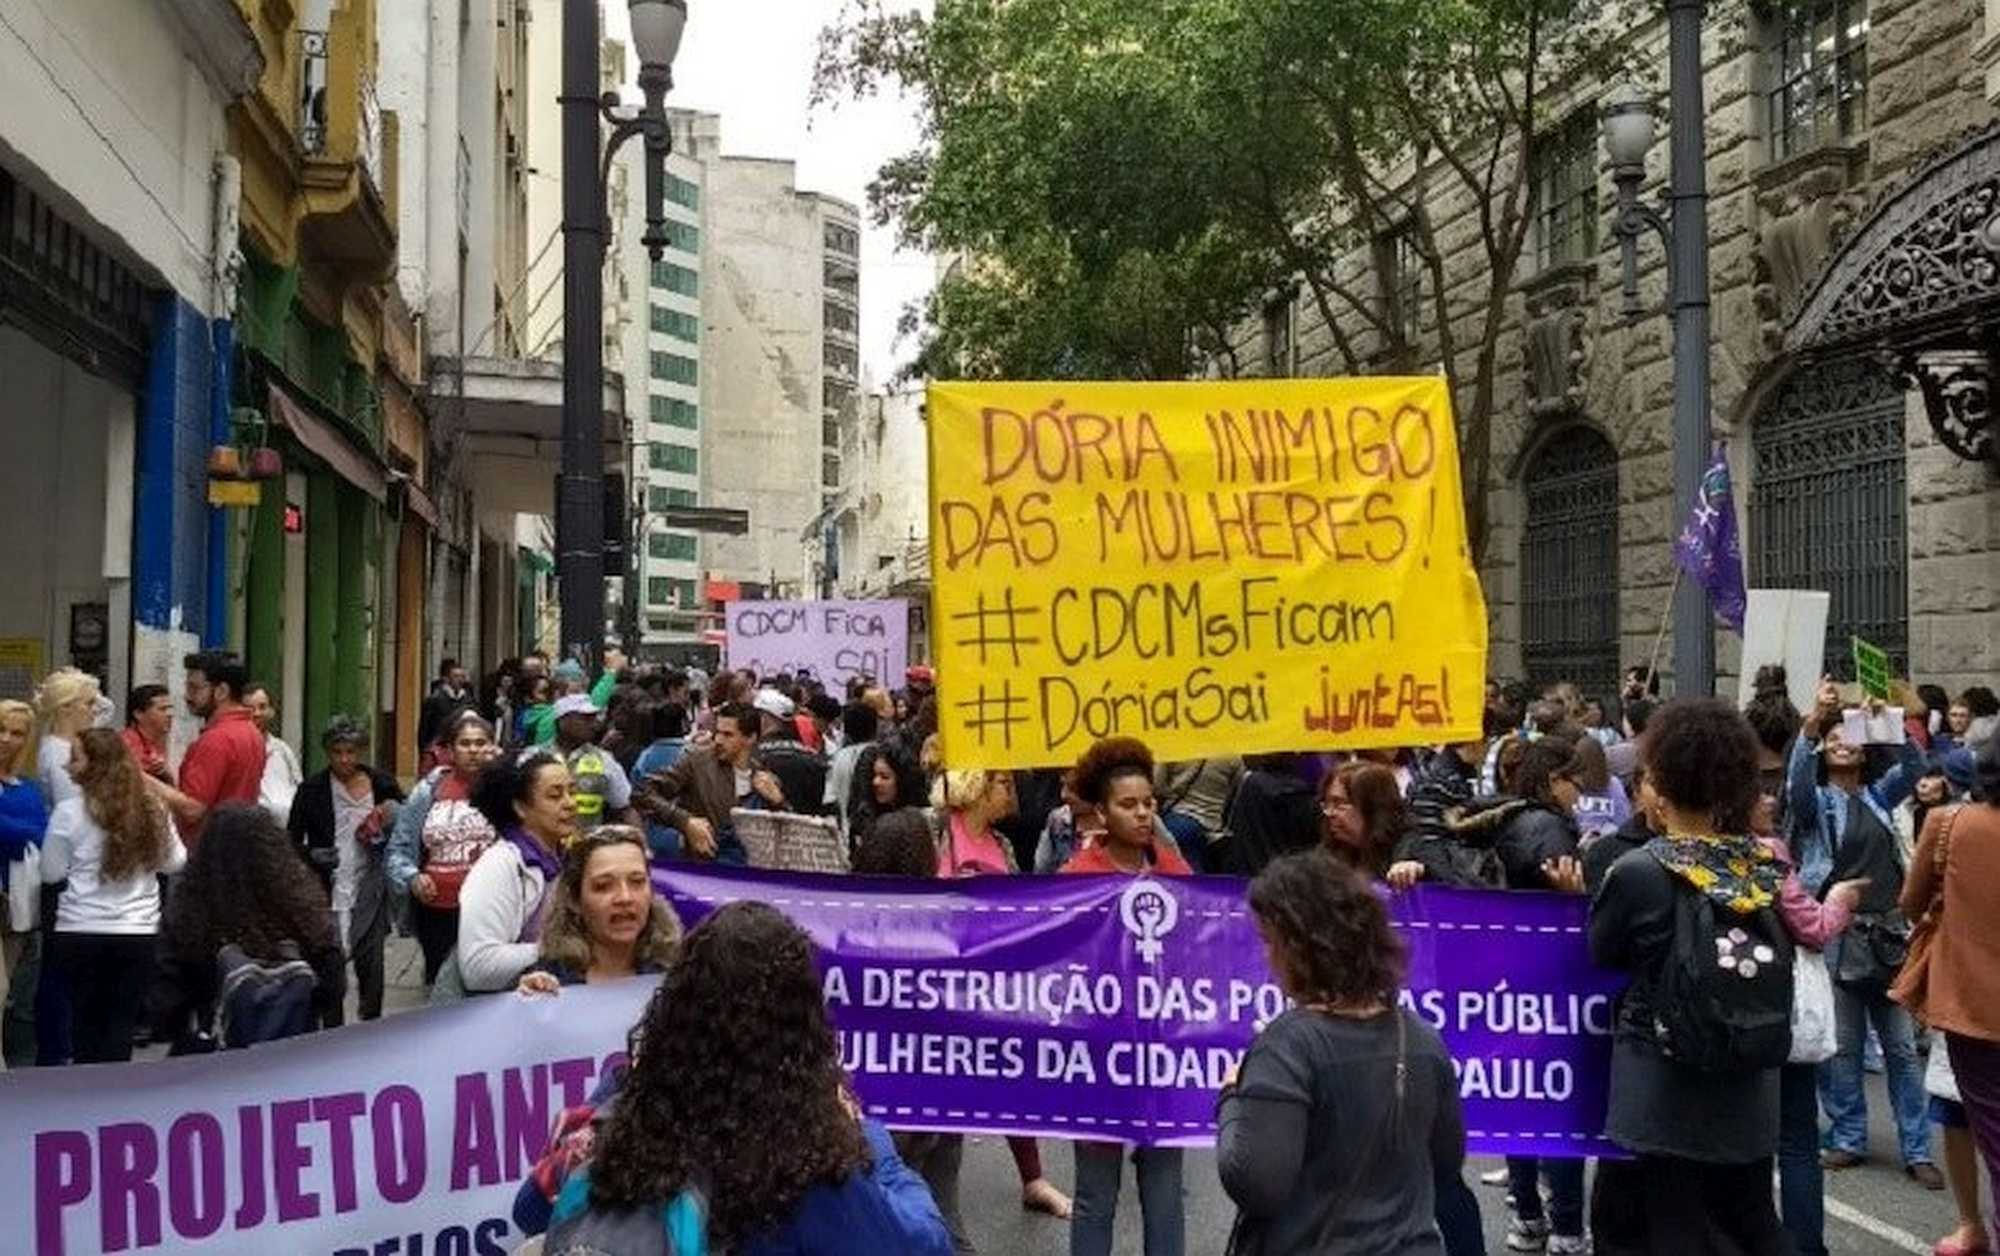 The protesters' banner accuses Doria of being an enemy of the women